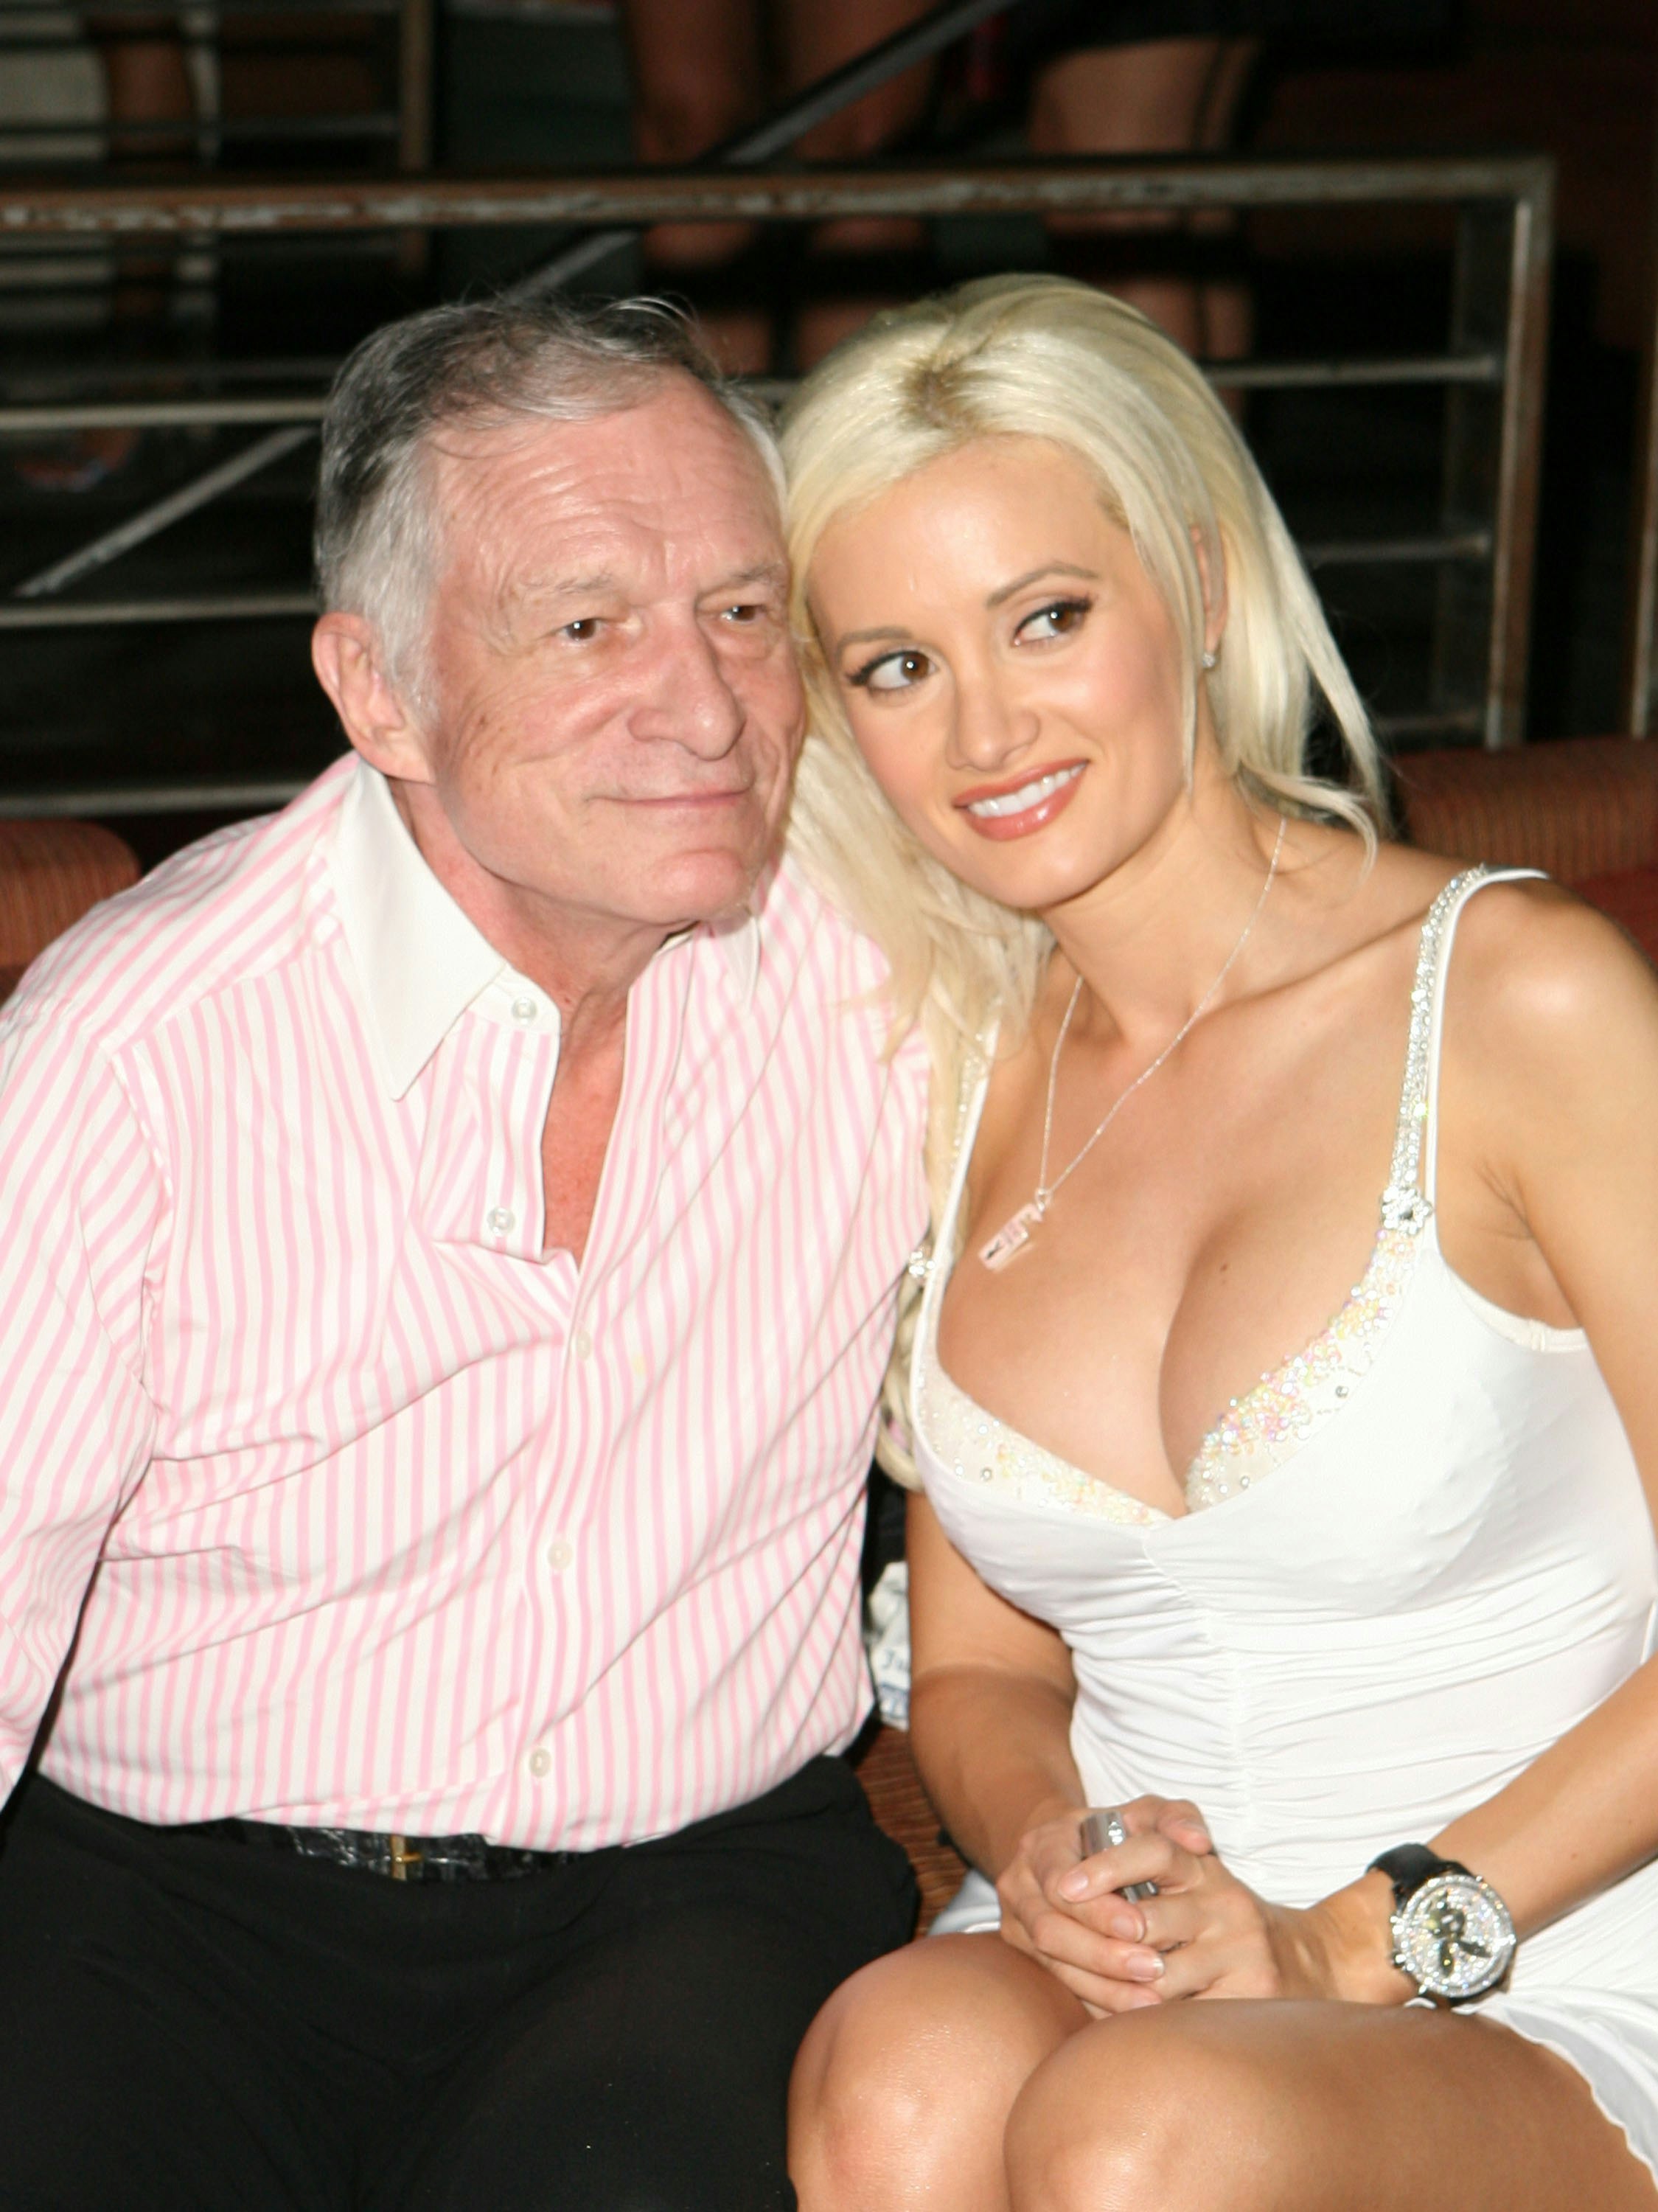 Holly Madison Recalls “Hell” Sex With High Hefner “He Wouldnt Move” pic